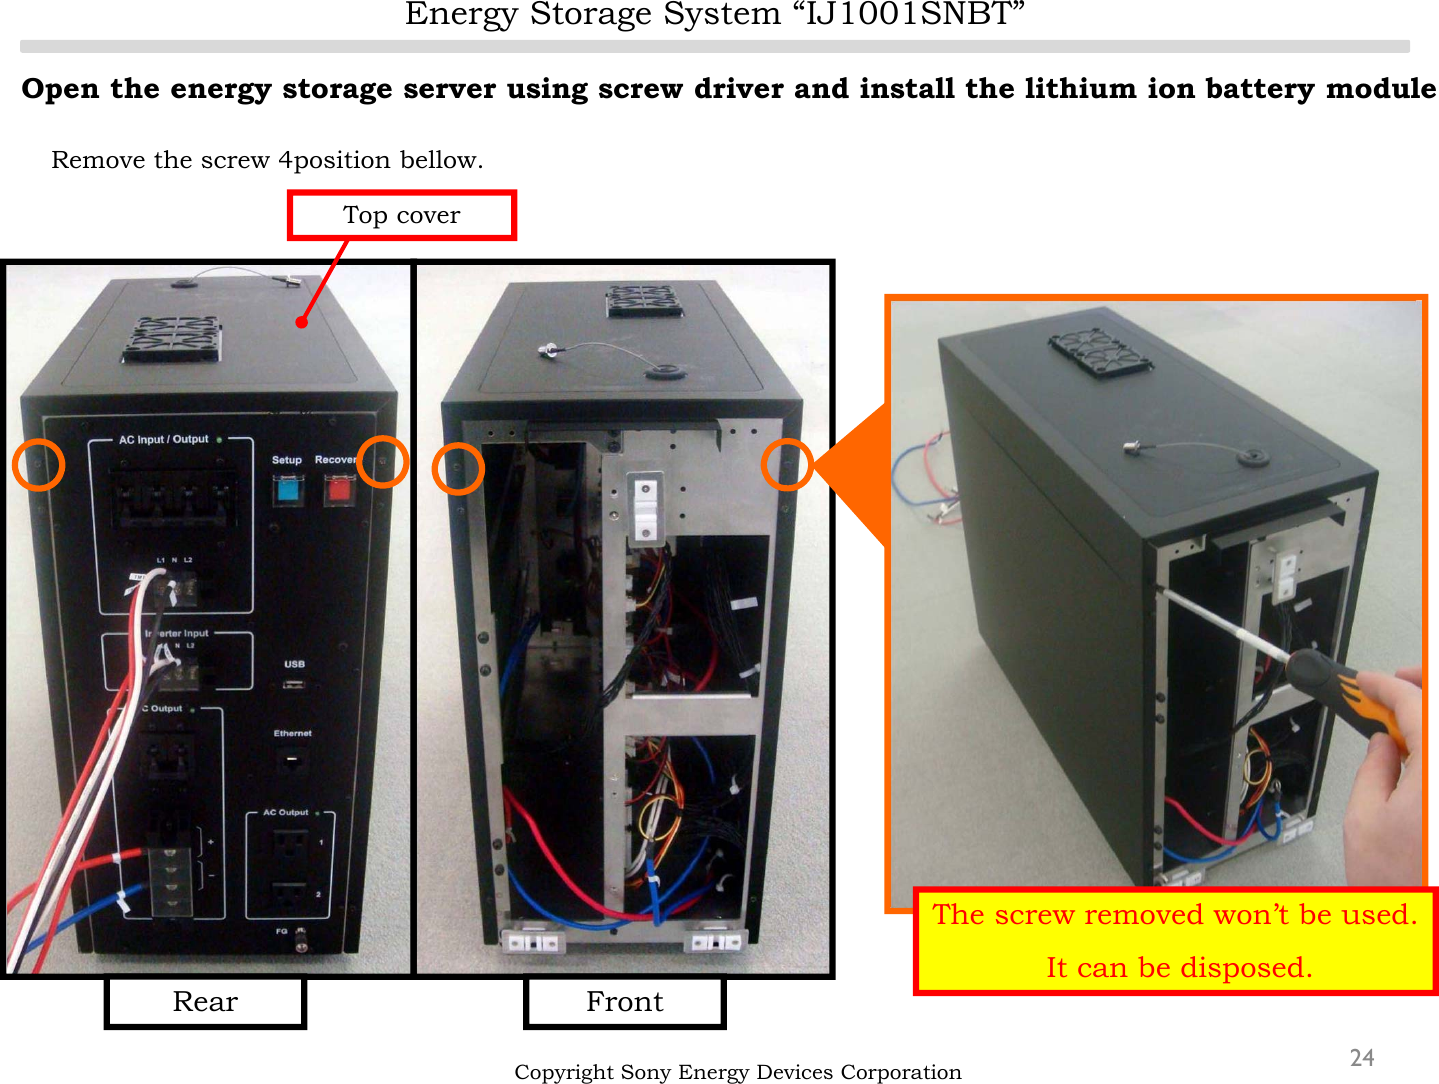 Energy Storage System “IJ1001SNBT”24Open the energy storage server using screw driver and install the lithium ion battery moduleRemove the screw 4position bellow.Copyright Sony Energy Devices CorporationFrontRearTop coverThe screw removed won’t be used.It can be disposed.